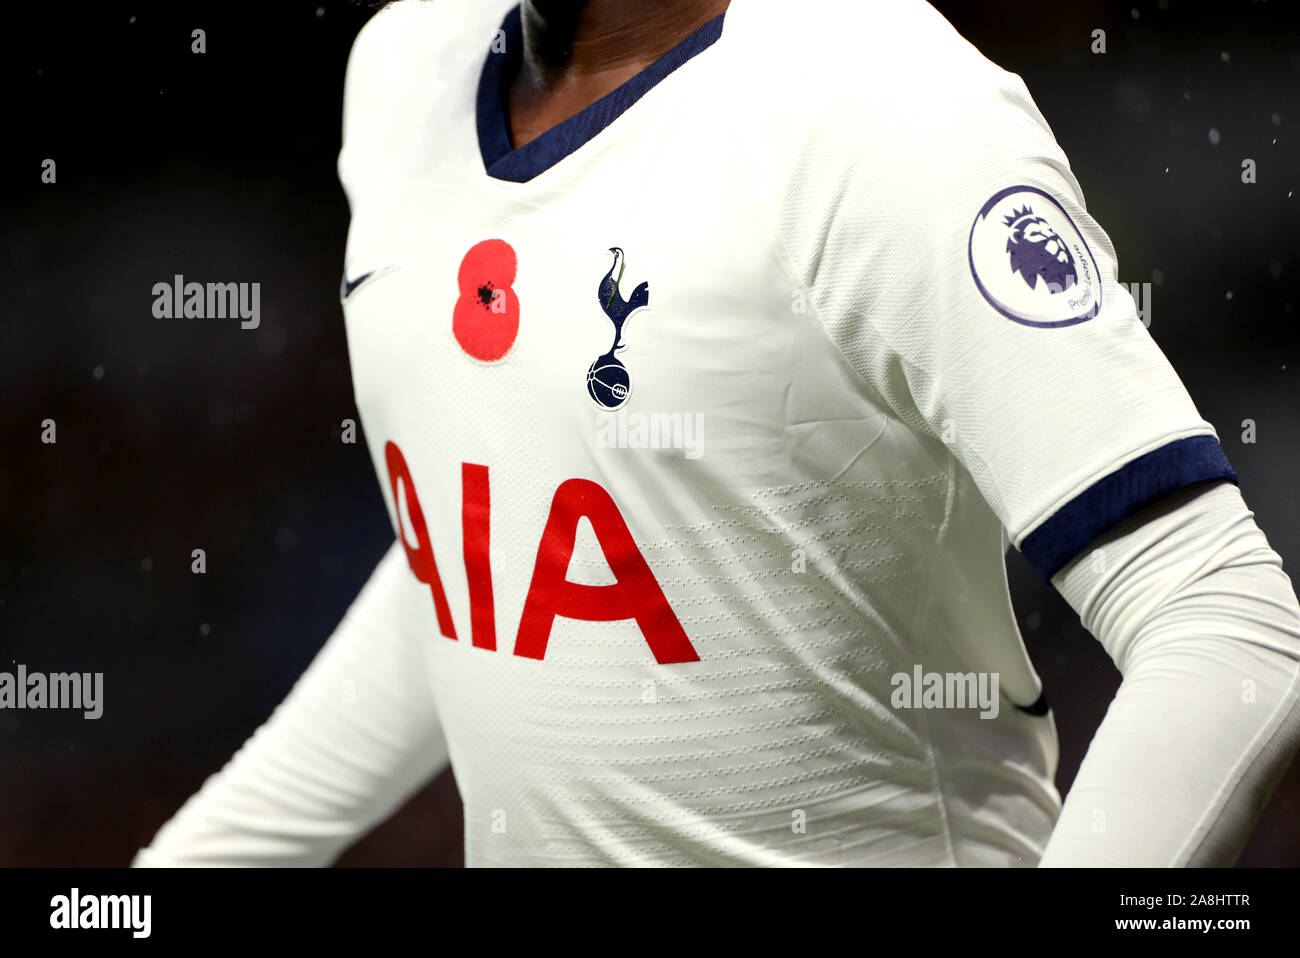 A detailed view of a poppy on a Spurs players shirt to honour Remembrance Day during the Premier League match at Tottenham Hotspur Stadium, London. Stock Photo